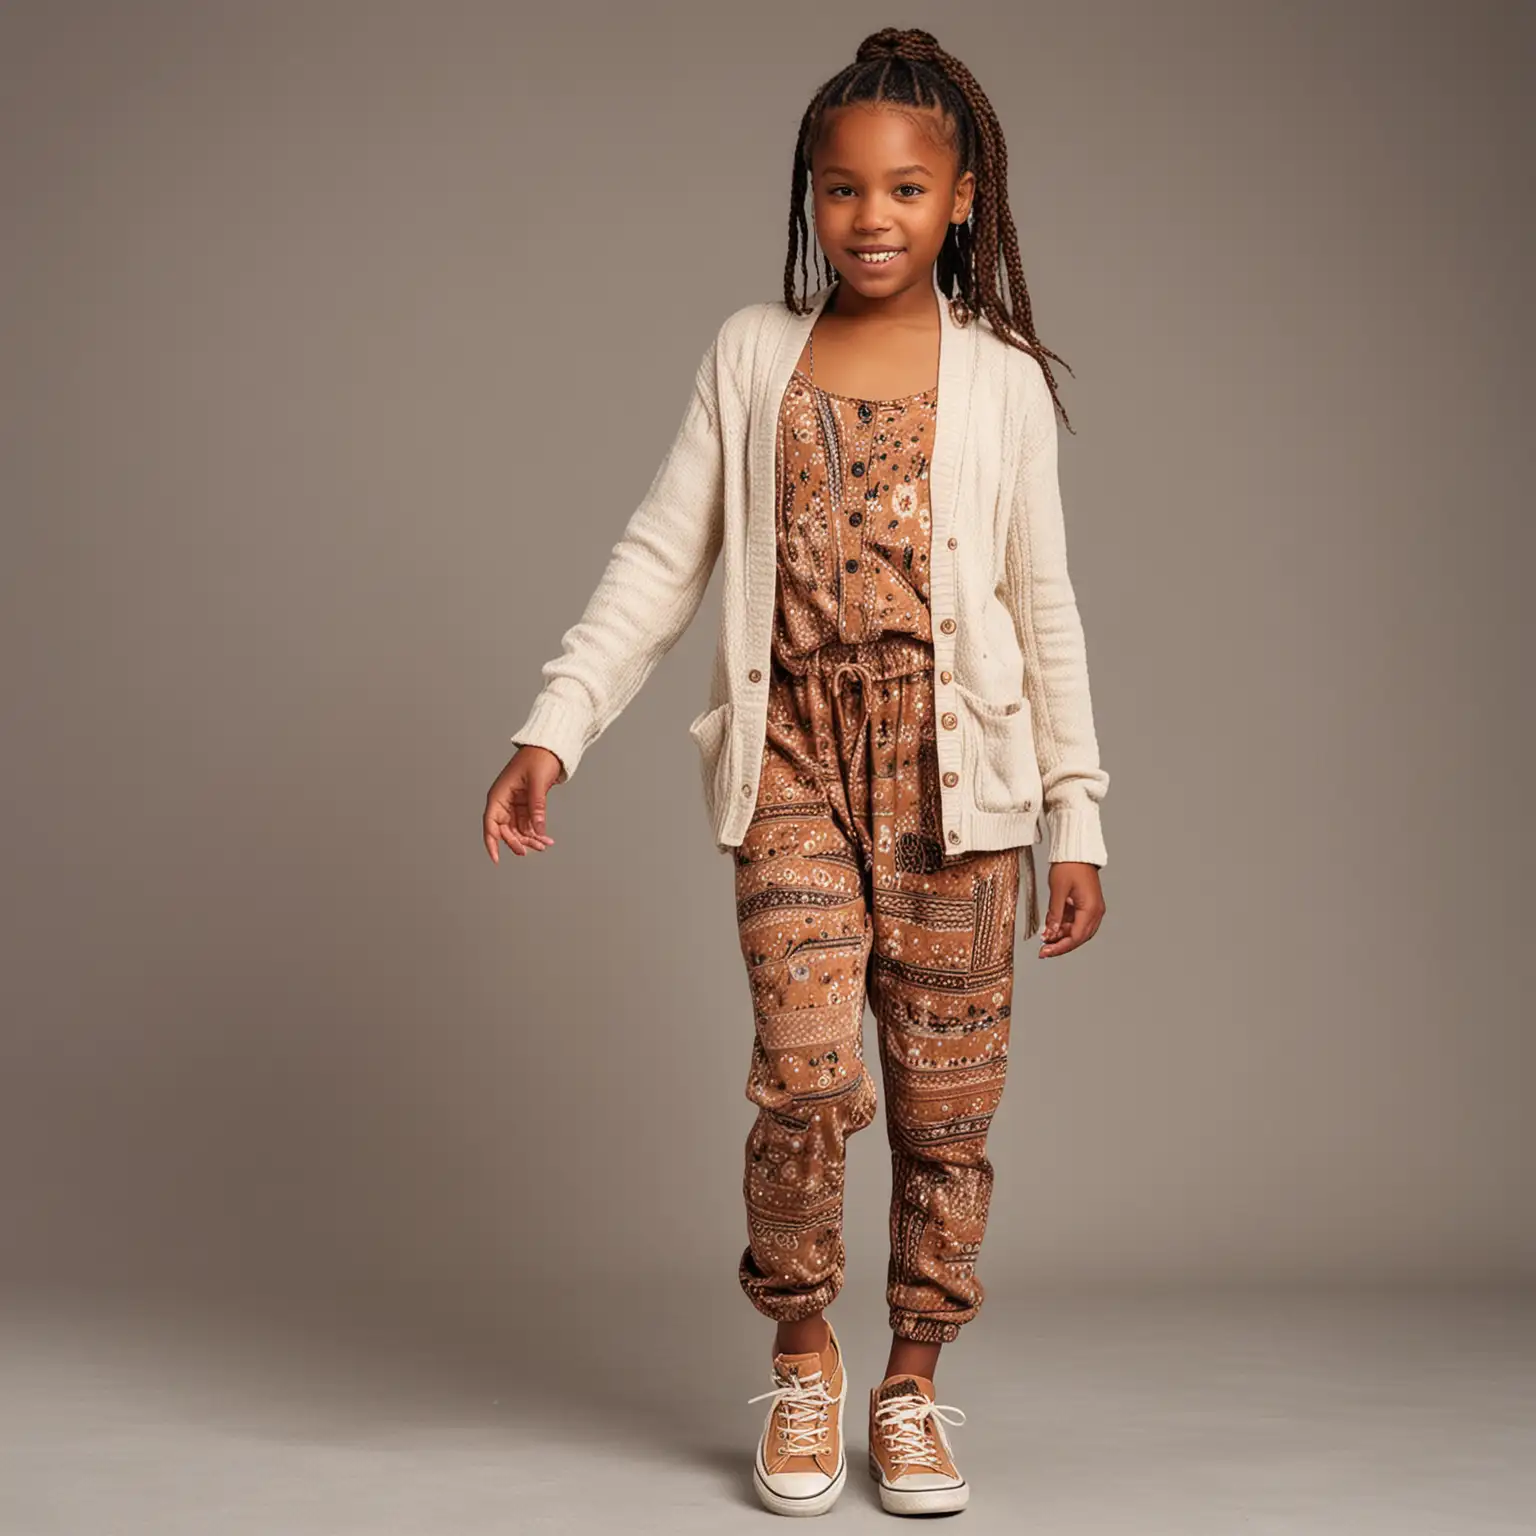 Adorable Boho Style 12YearOld Black Girl in Braids and Jumpsuit